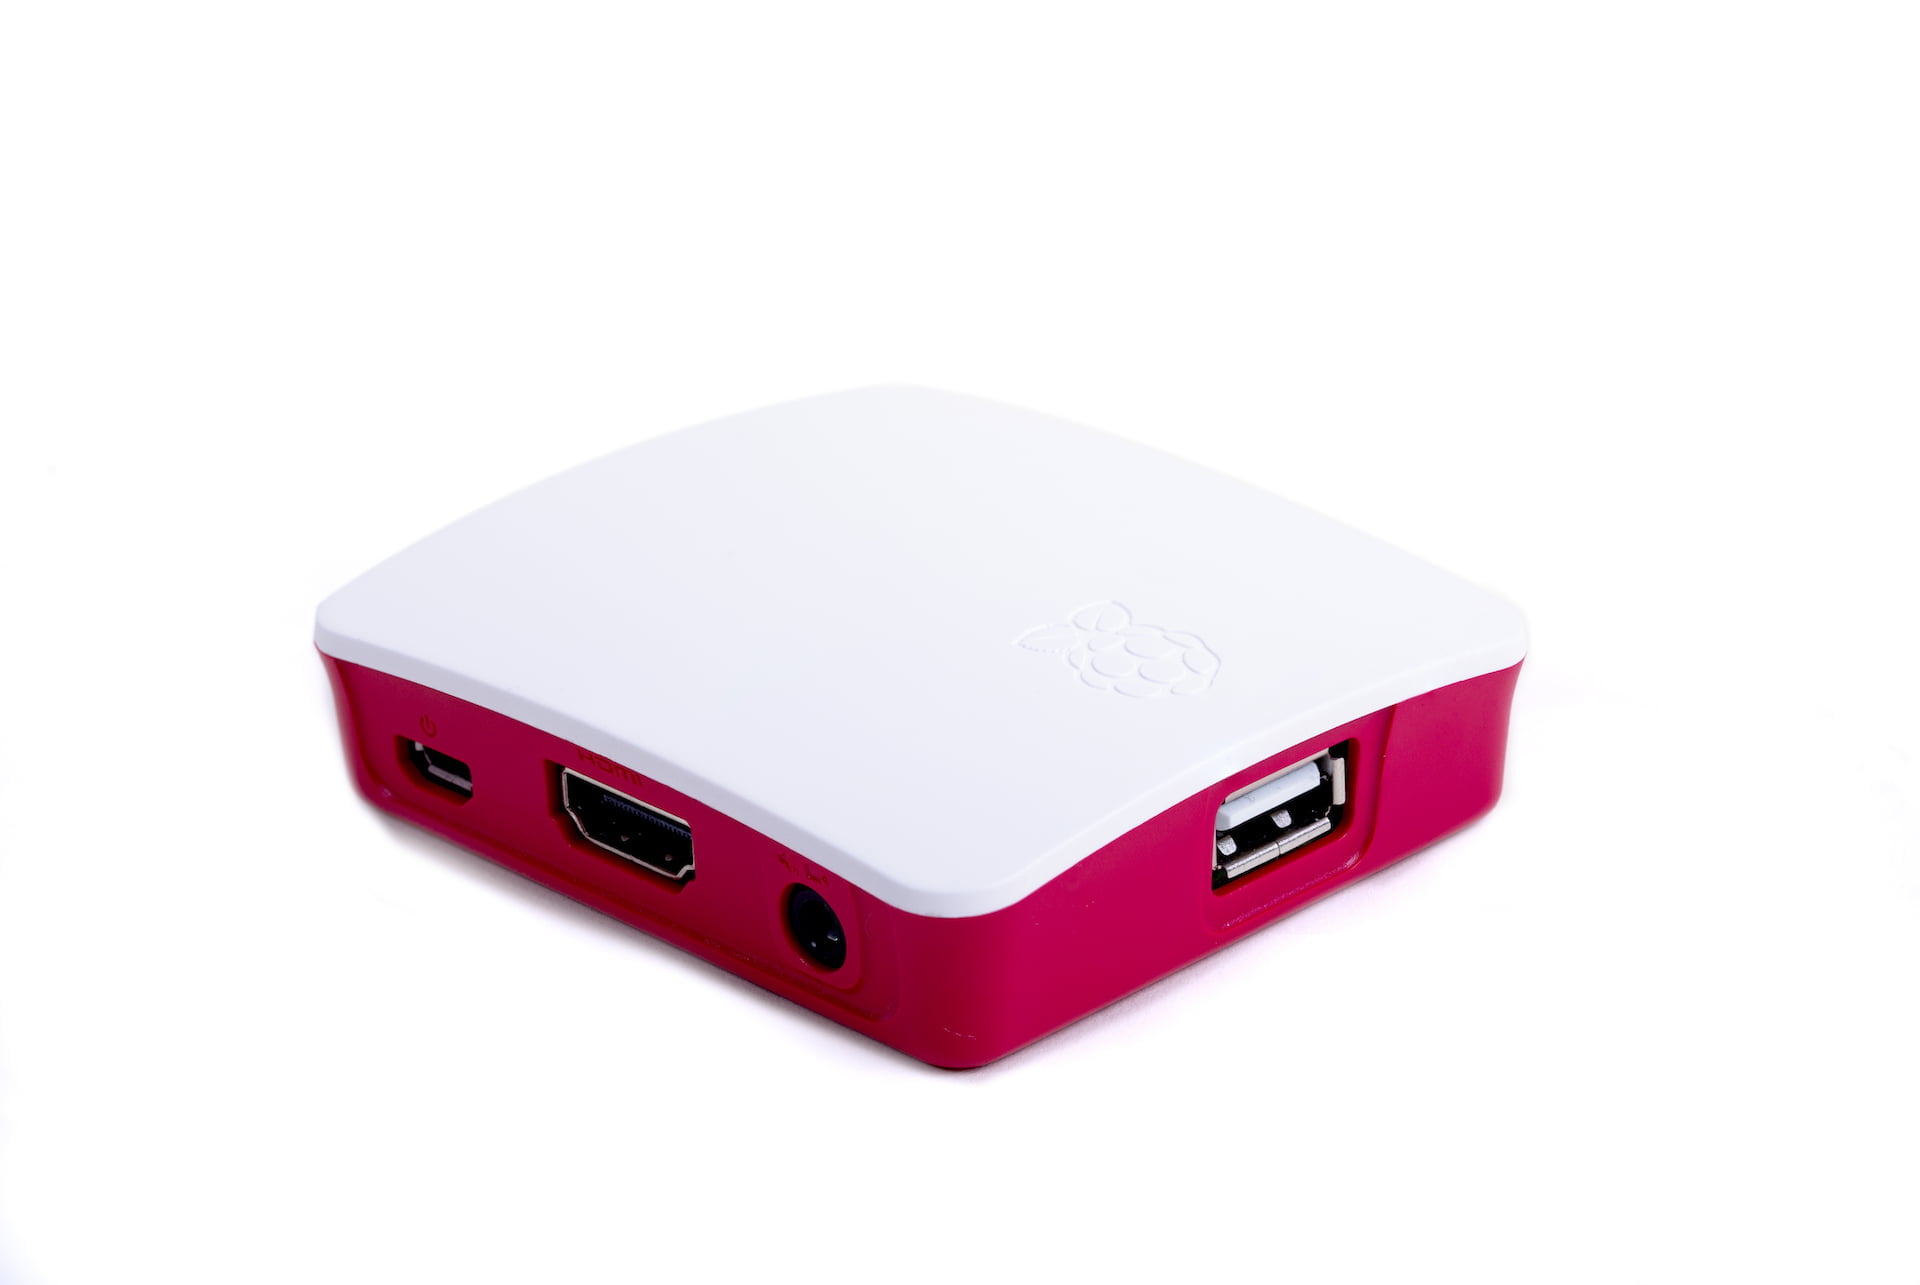 Official Raspberry Pi 3 A+ Case - White/Red